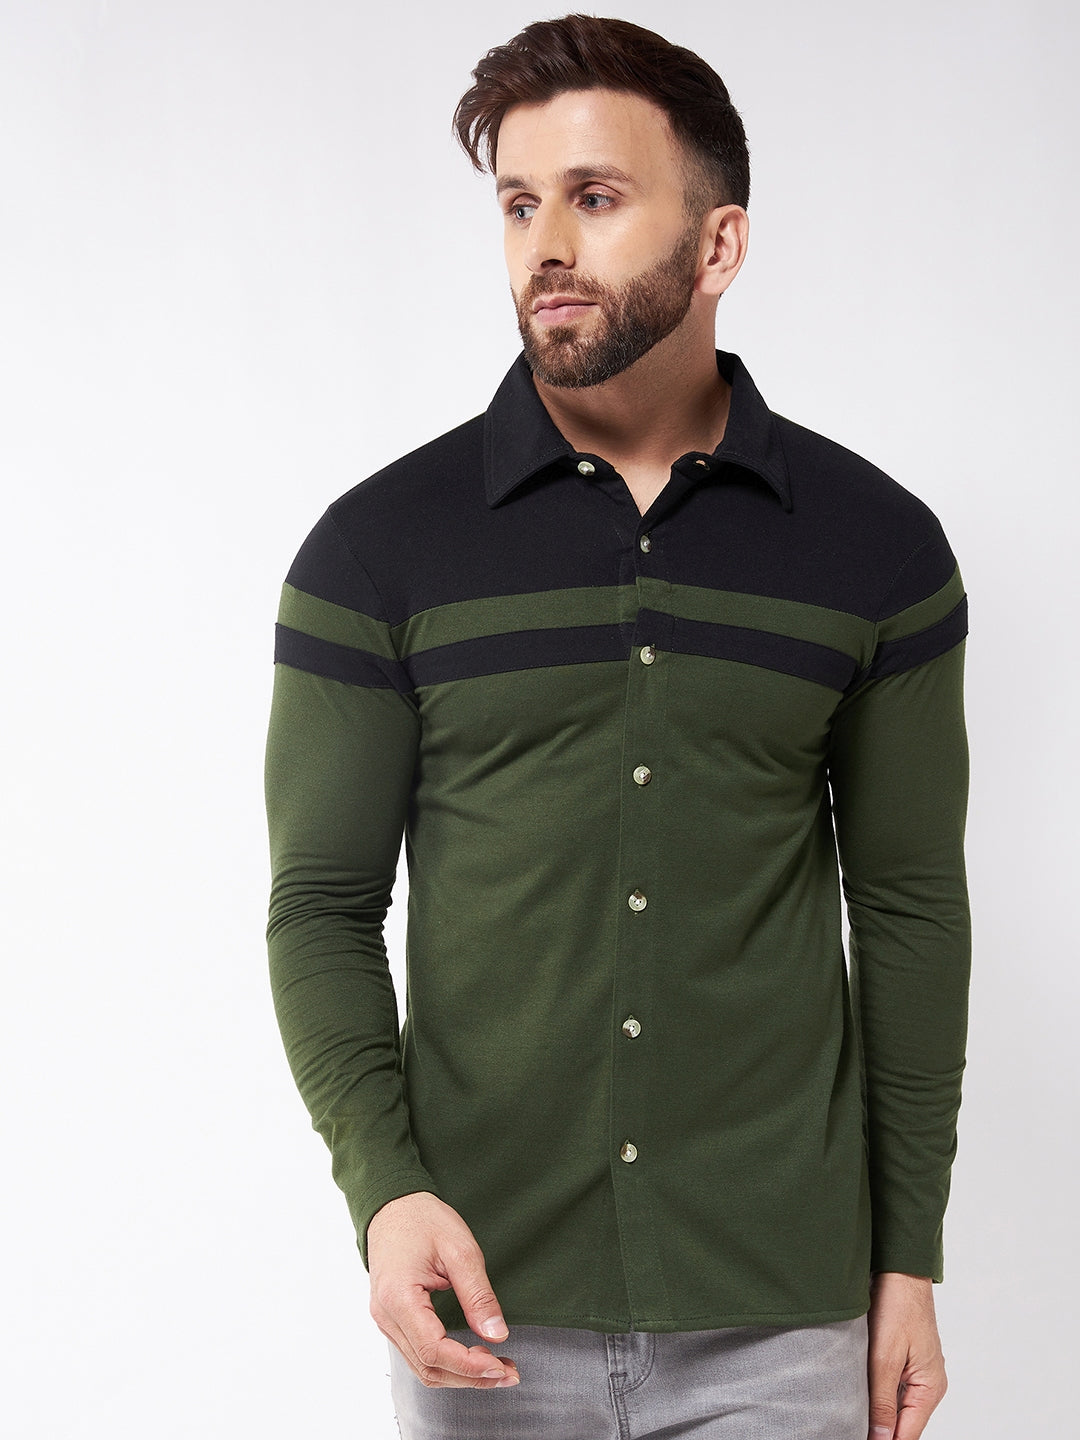 Black and Olive Color Block Full Sleeve Shirt